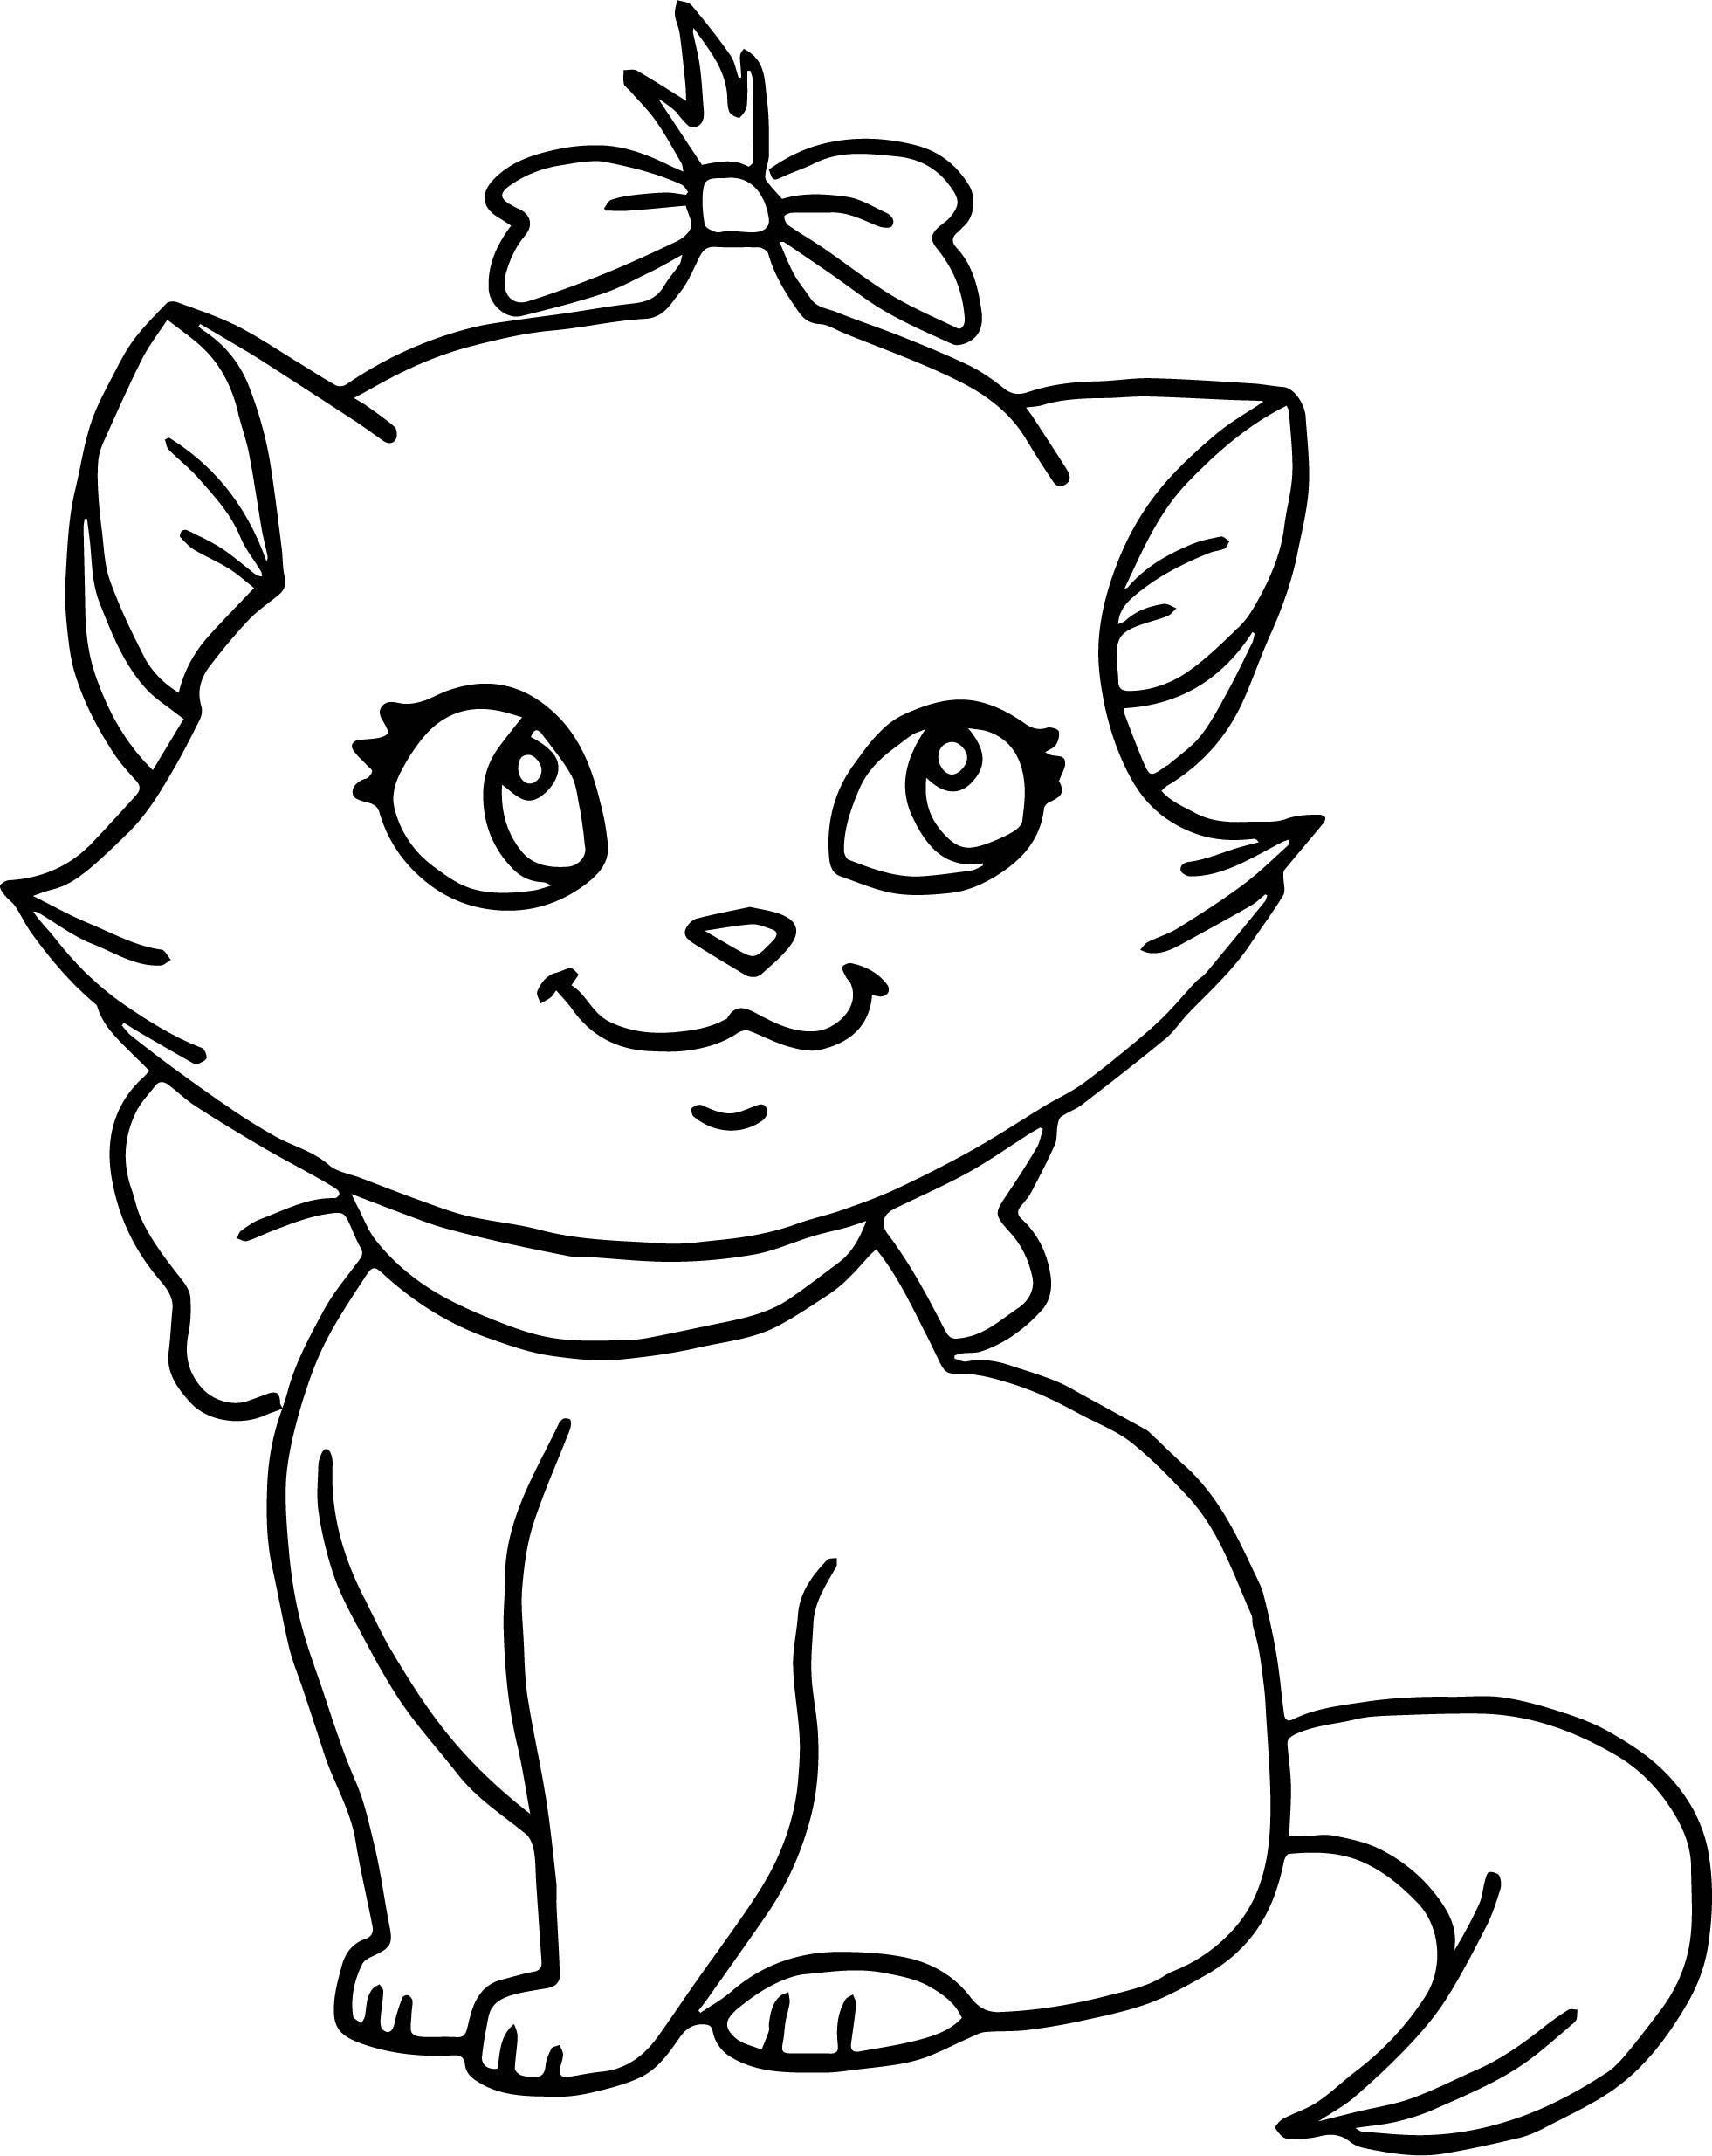 Kitten Cat Coloring Pages / Free Printable Kitten Coloring Pages For